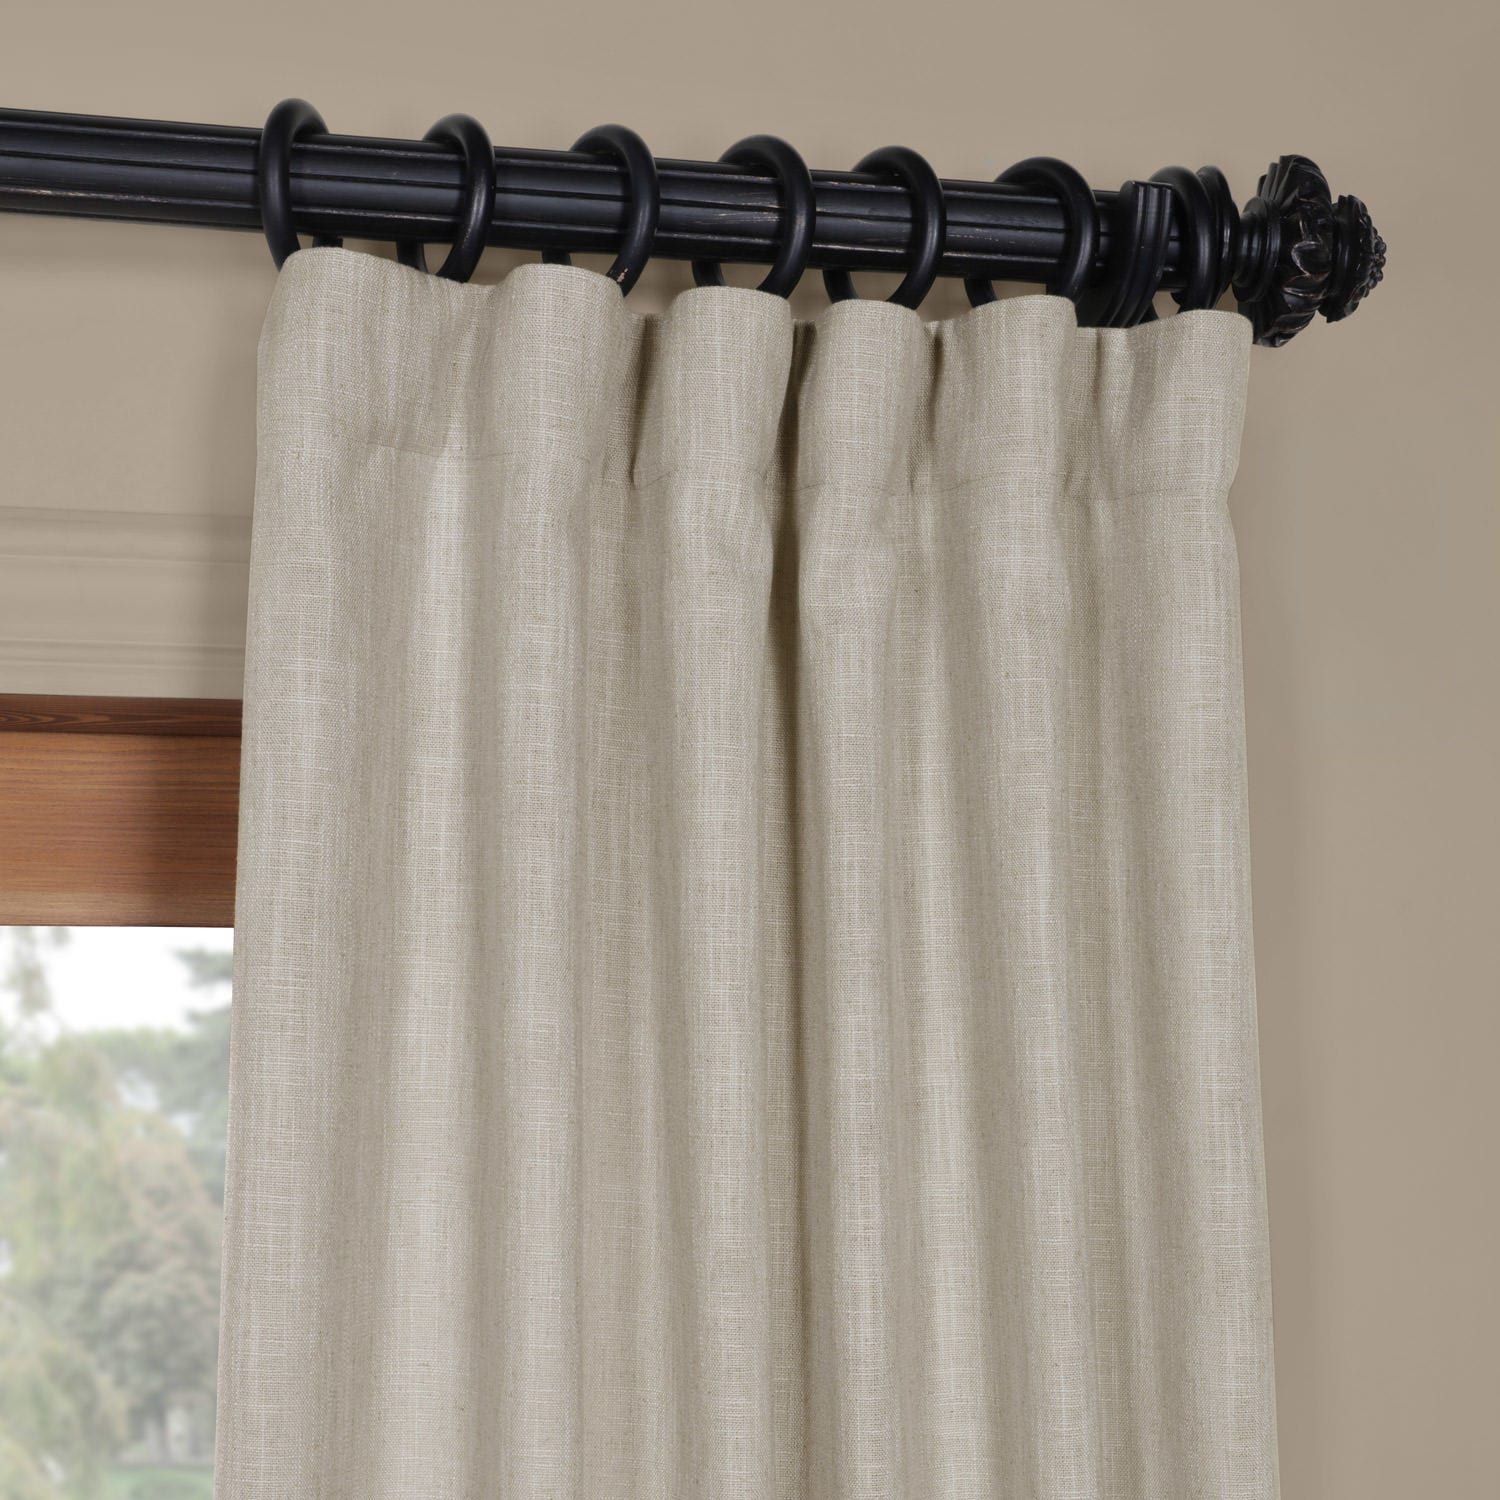 Half Price Drapes Solid Heavy Faux Linen Rod Pocket Single Curtain Panel Throughout Heavy Faux Linen Single Curtain Panels (Photo 3 of 20)